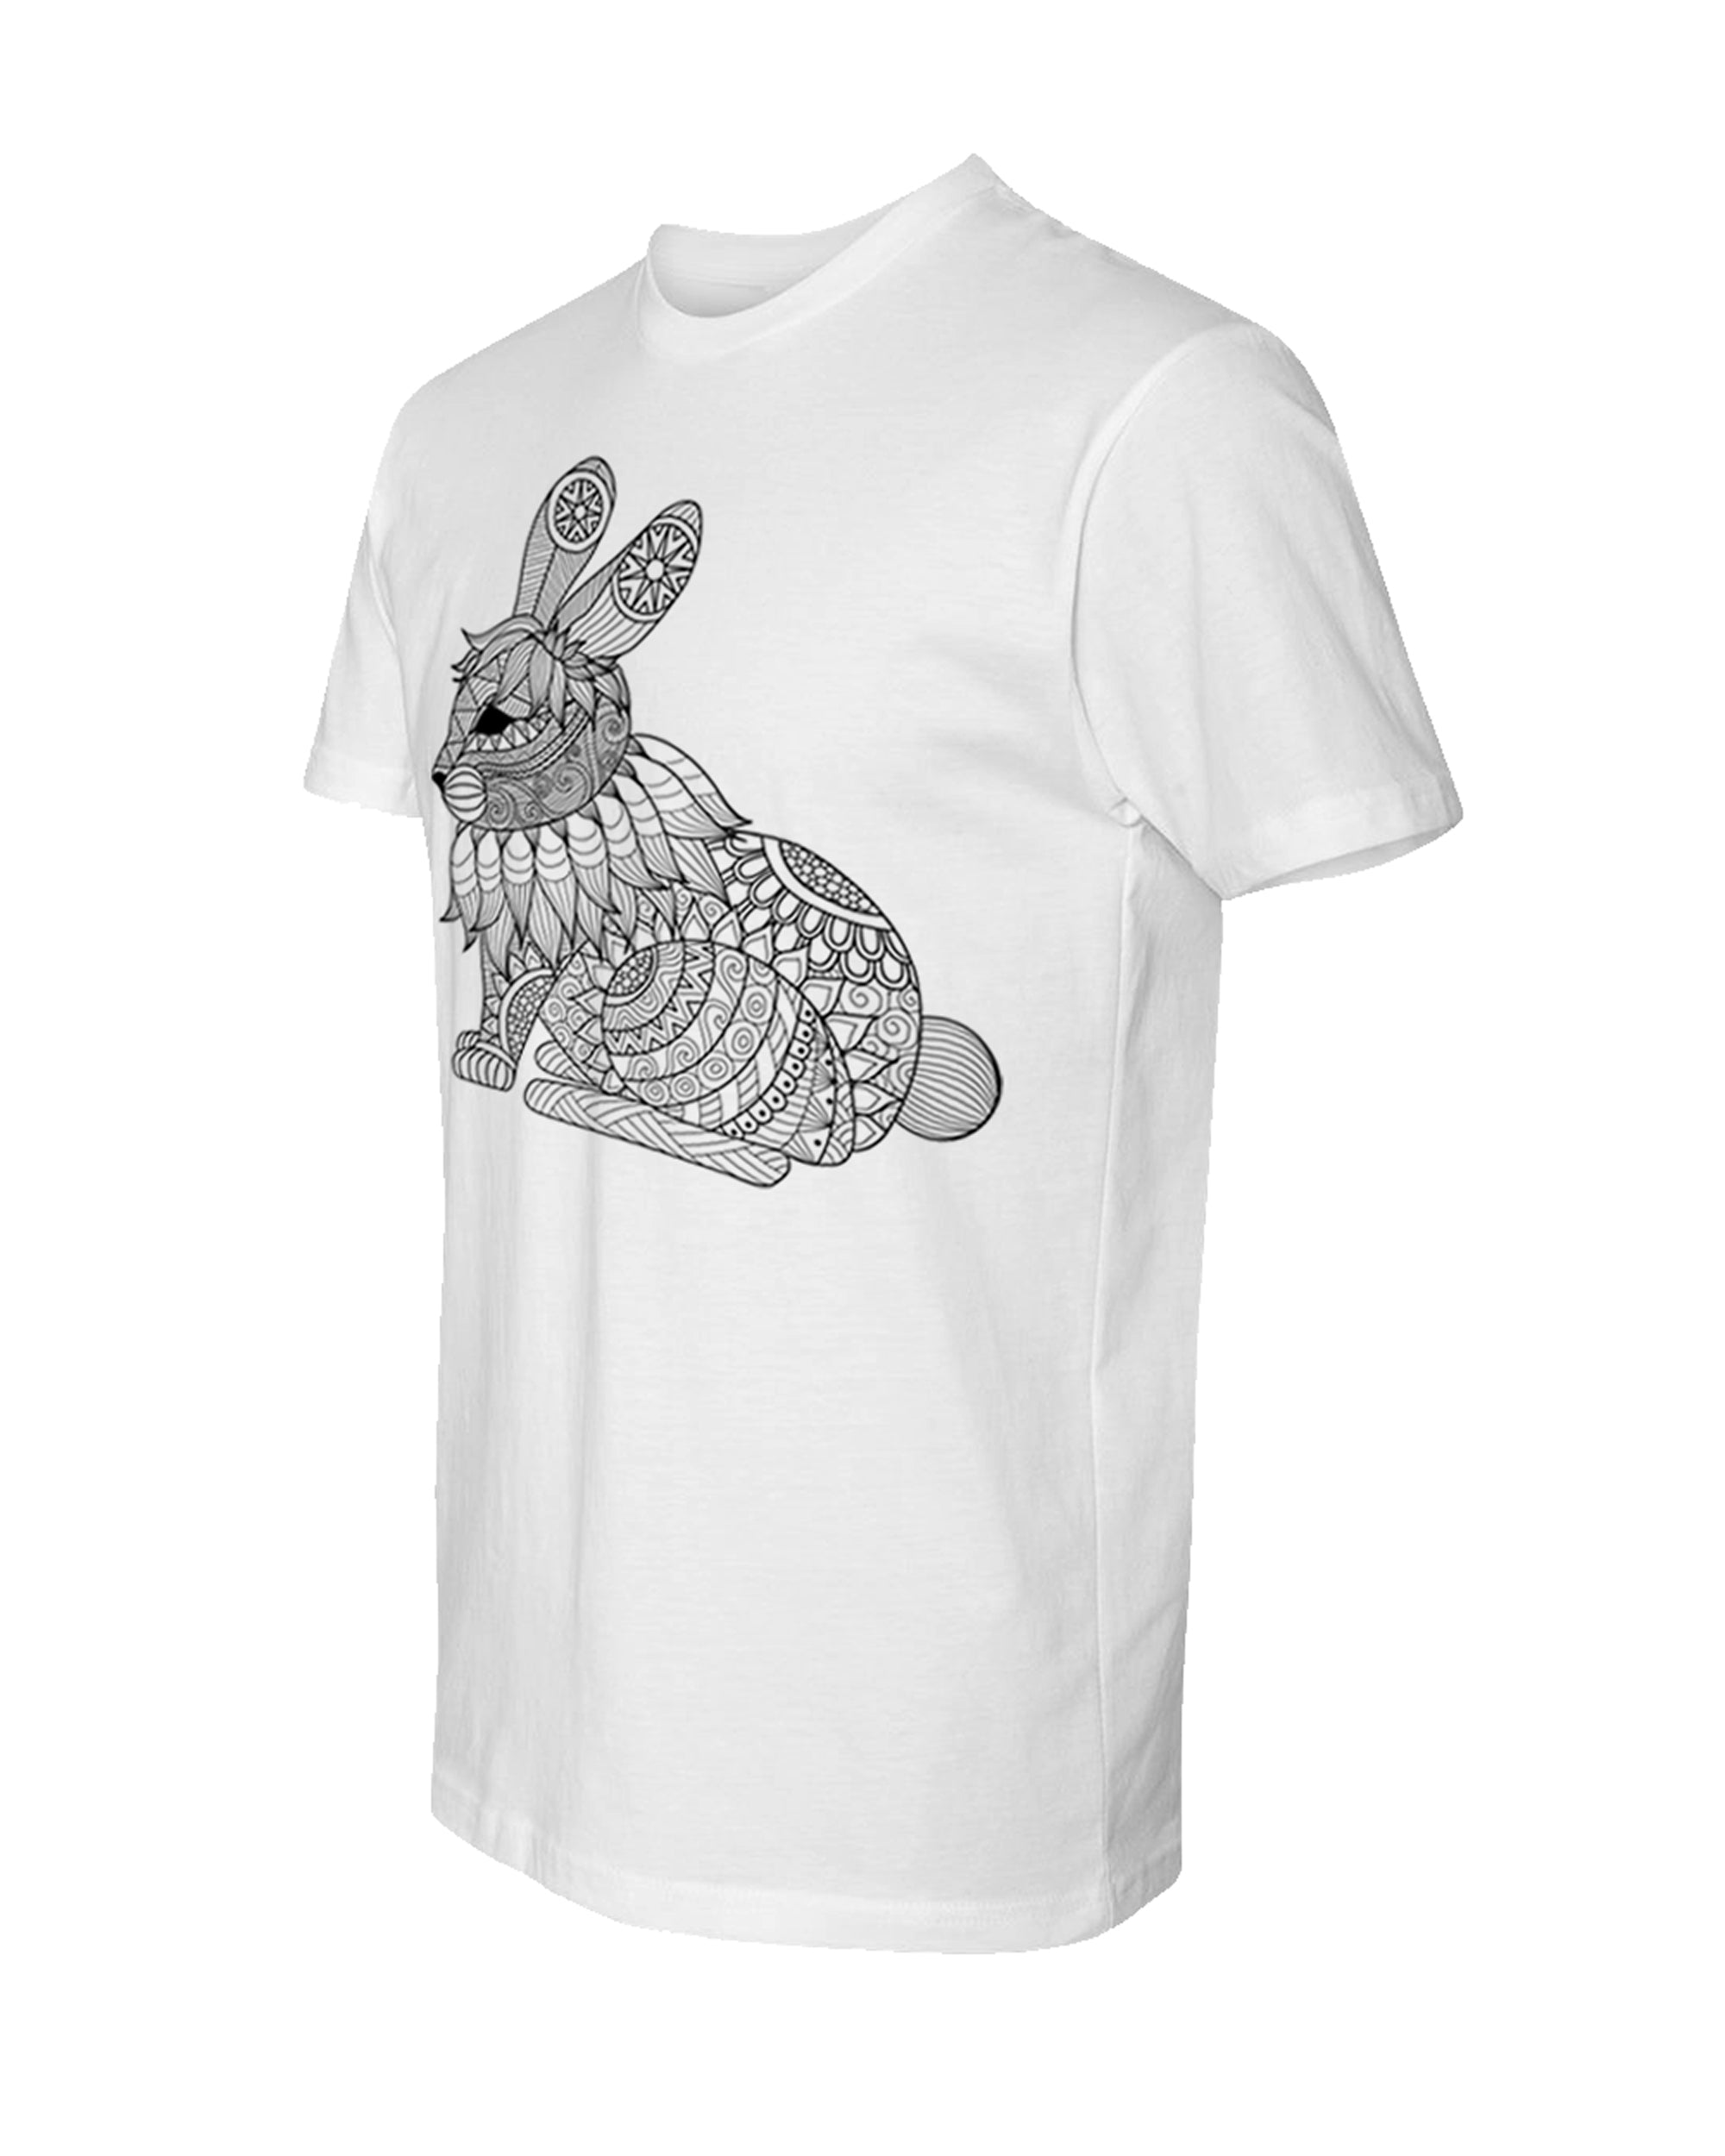 Men’s Coloring Bunny White T Shirt - Adorned By You